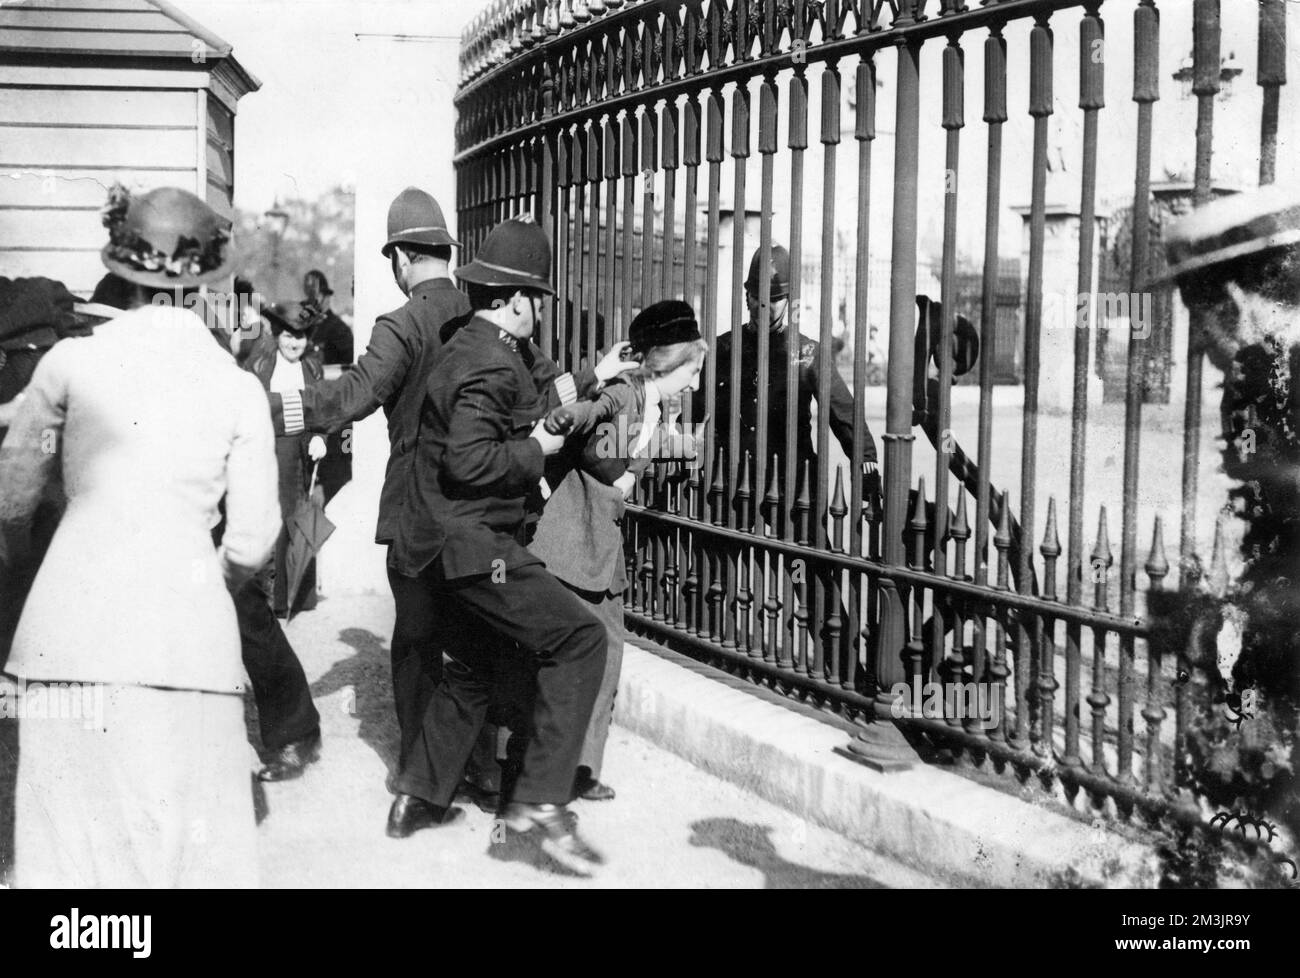 A protesting suffragette is forcibly removed from the railings of Buckingham Palace by policemen     Date: 1914 Stock Photo